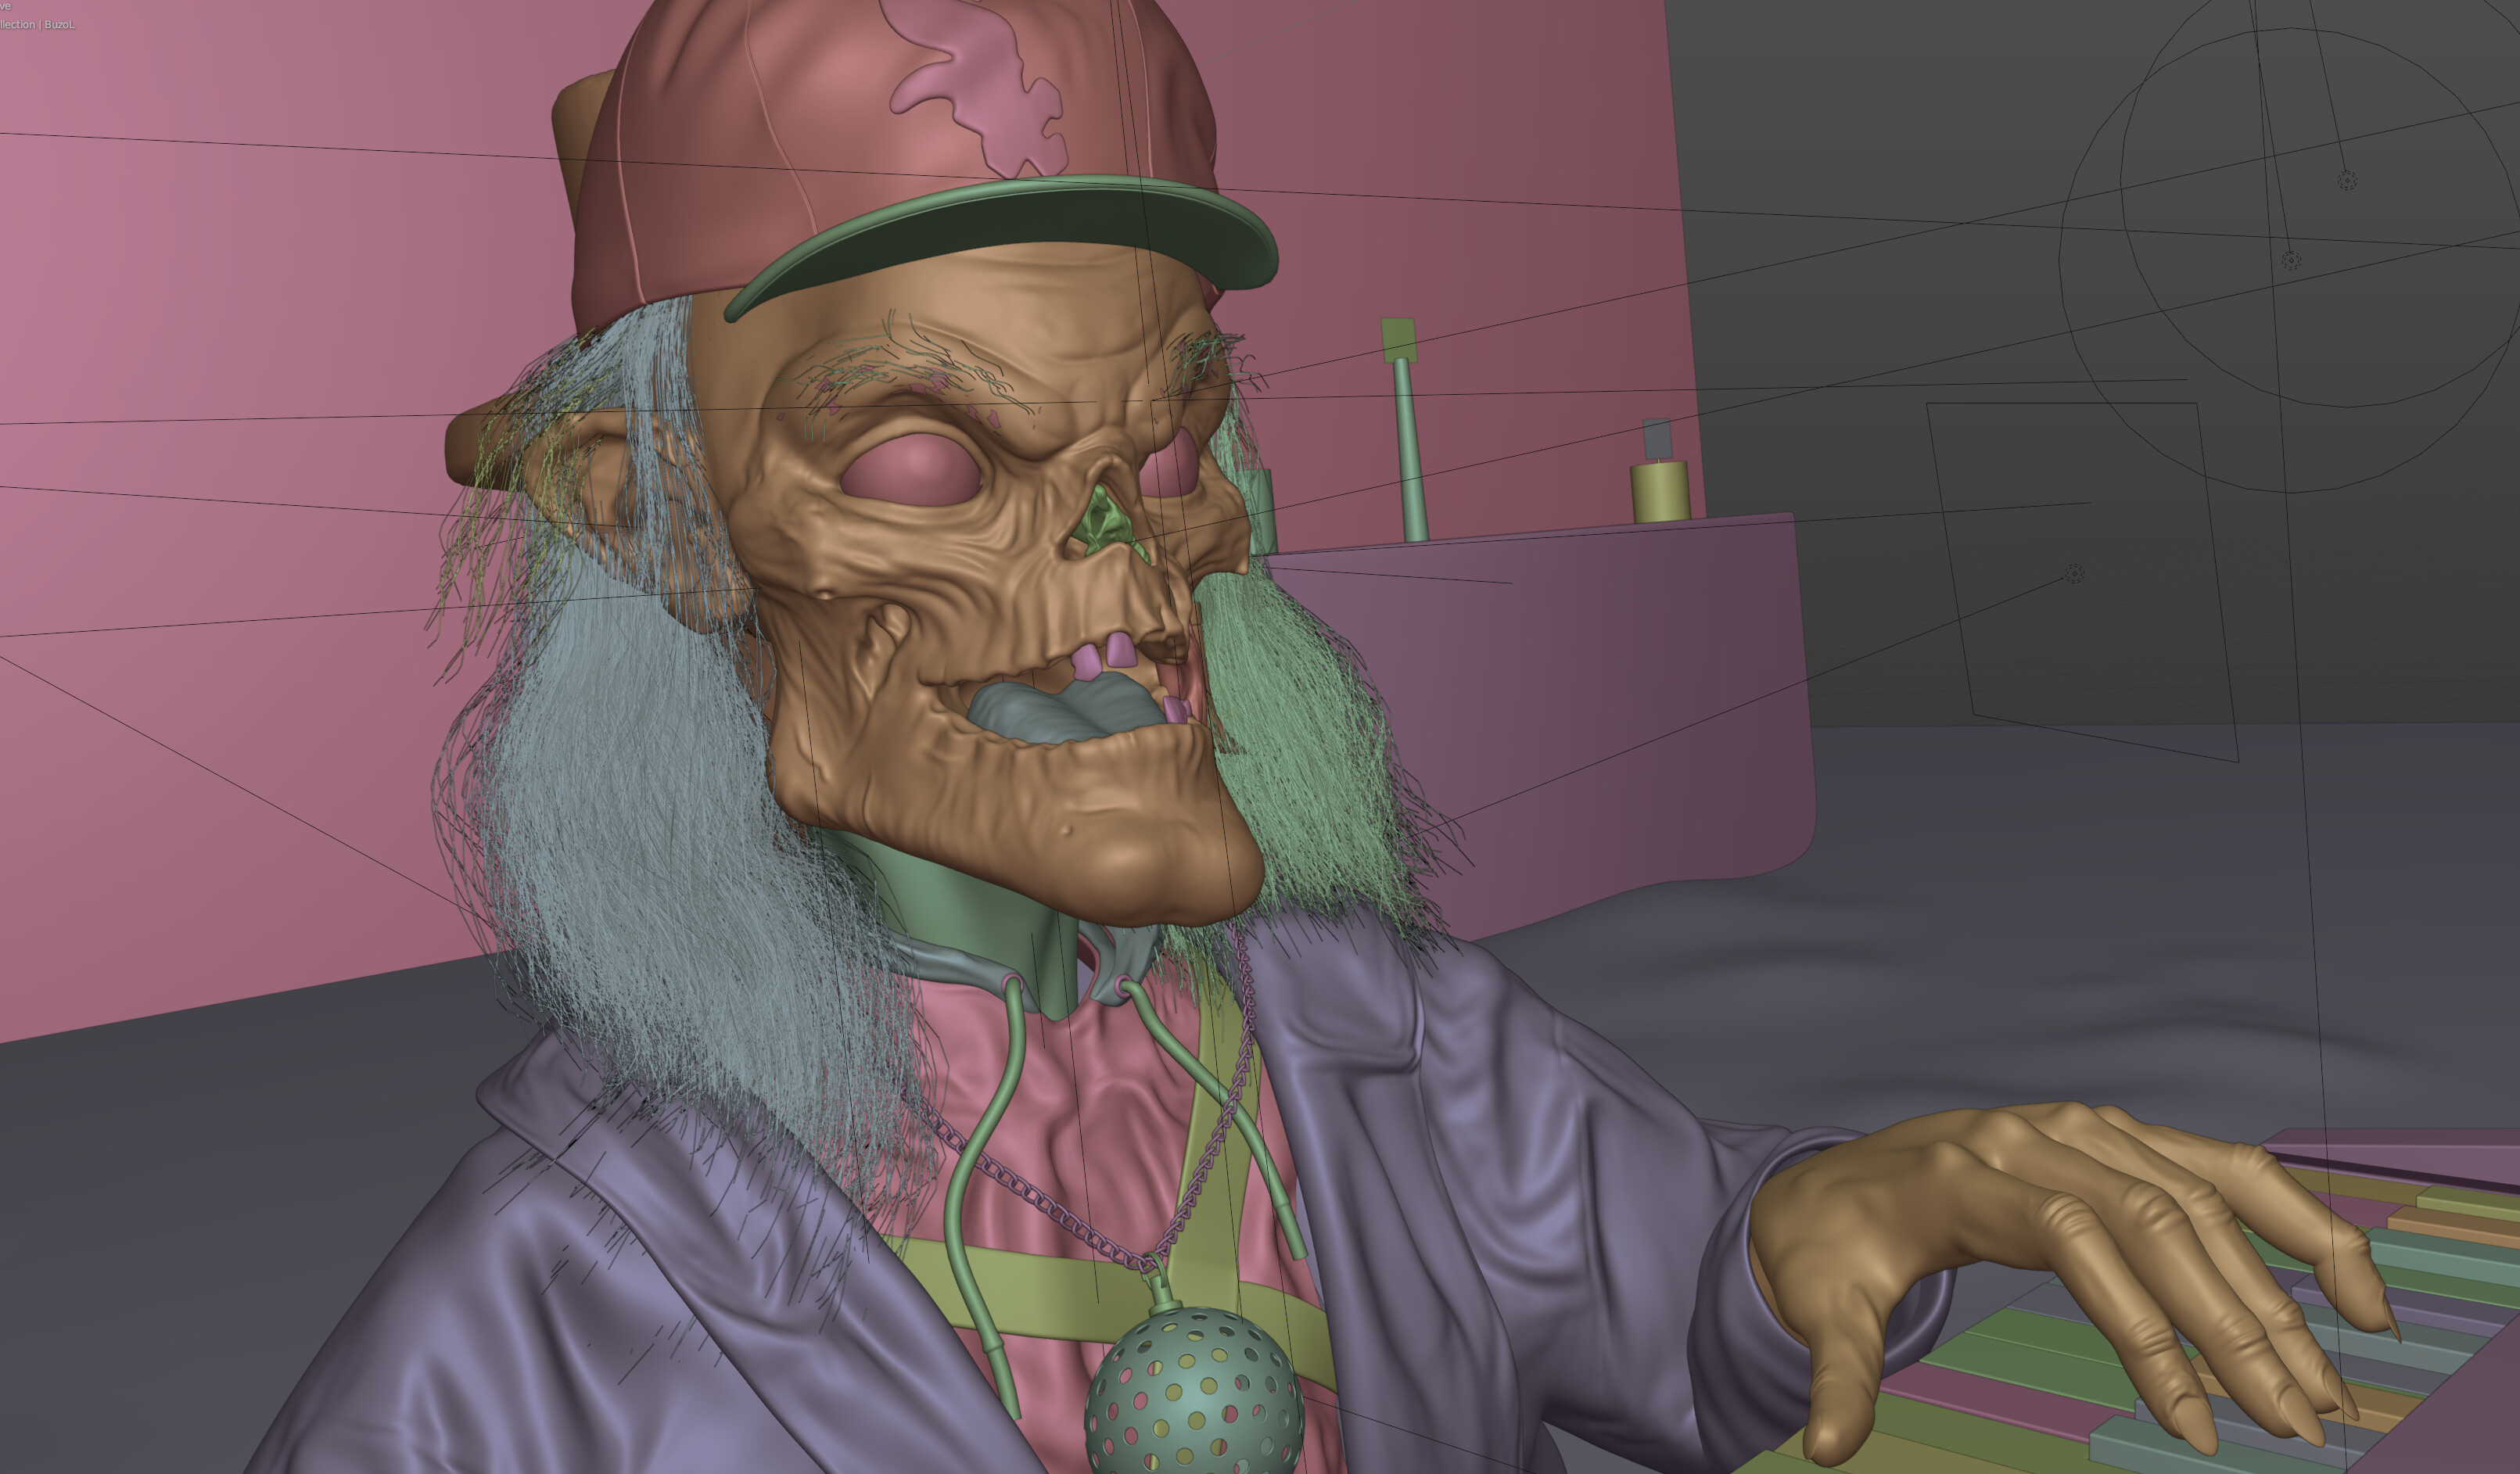 Tales from the Crypt - Keeper fan art - Finished Projects - Blender Artists  Community